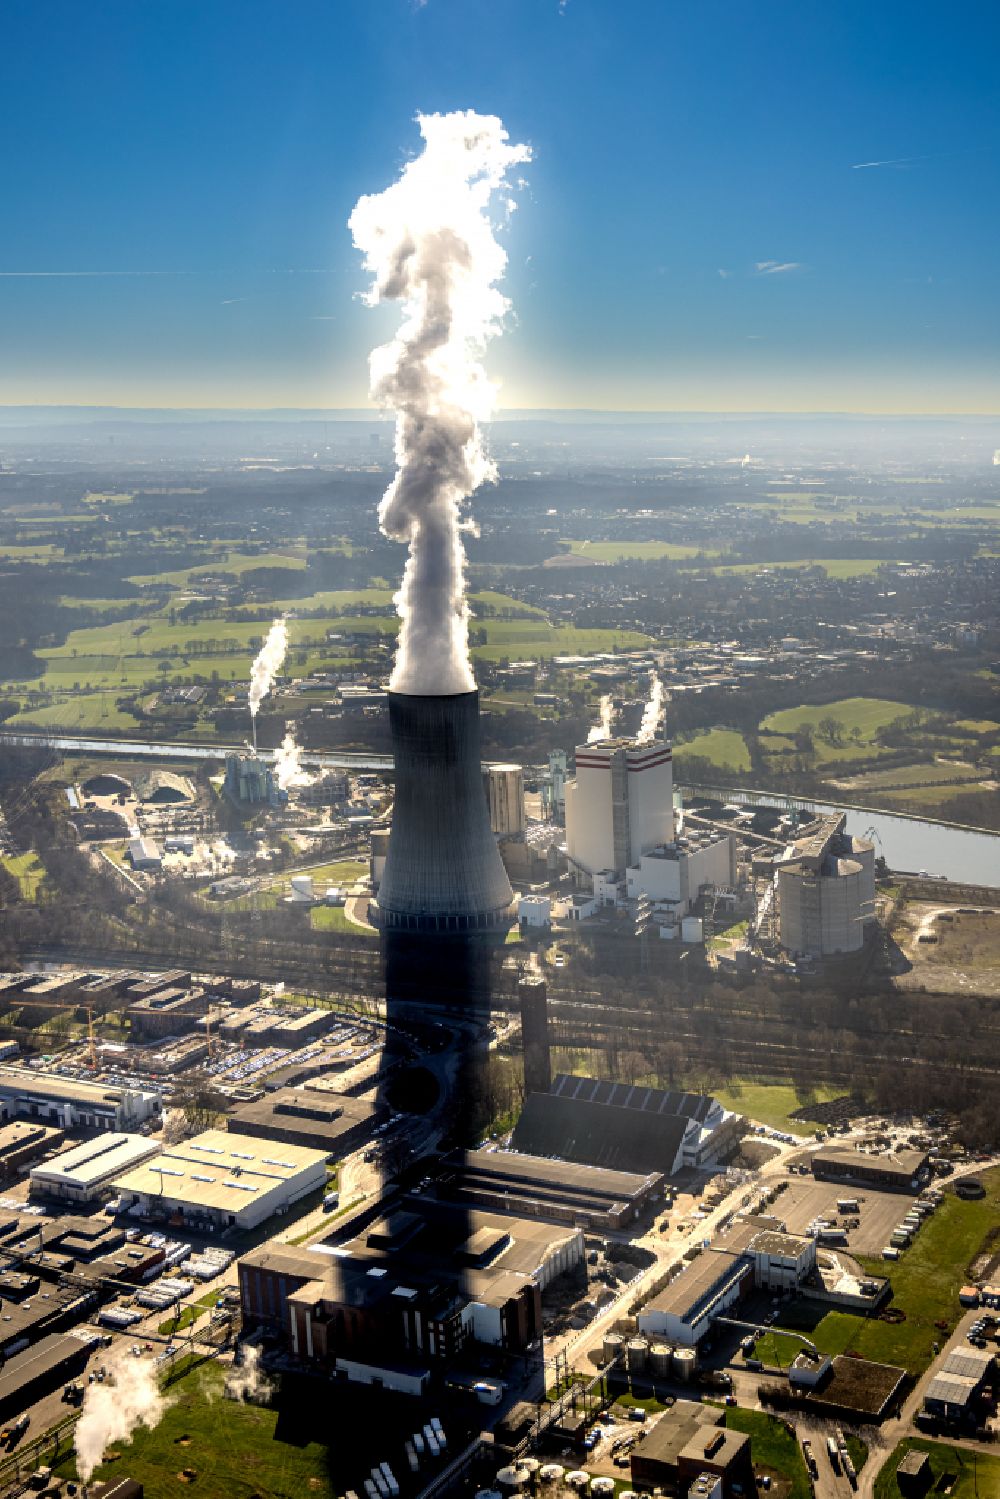 Aerial image Lünen - Power plant facilities of the coal-fired combined heat and power plant Kohlekraftwerk Luenen GmbH & Co. KG in Luenen in the federal state of North Rhine-Westphalia - NRW, Germany